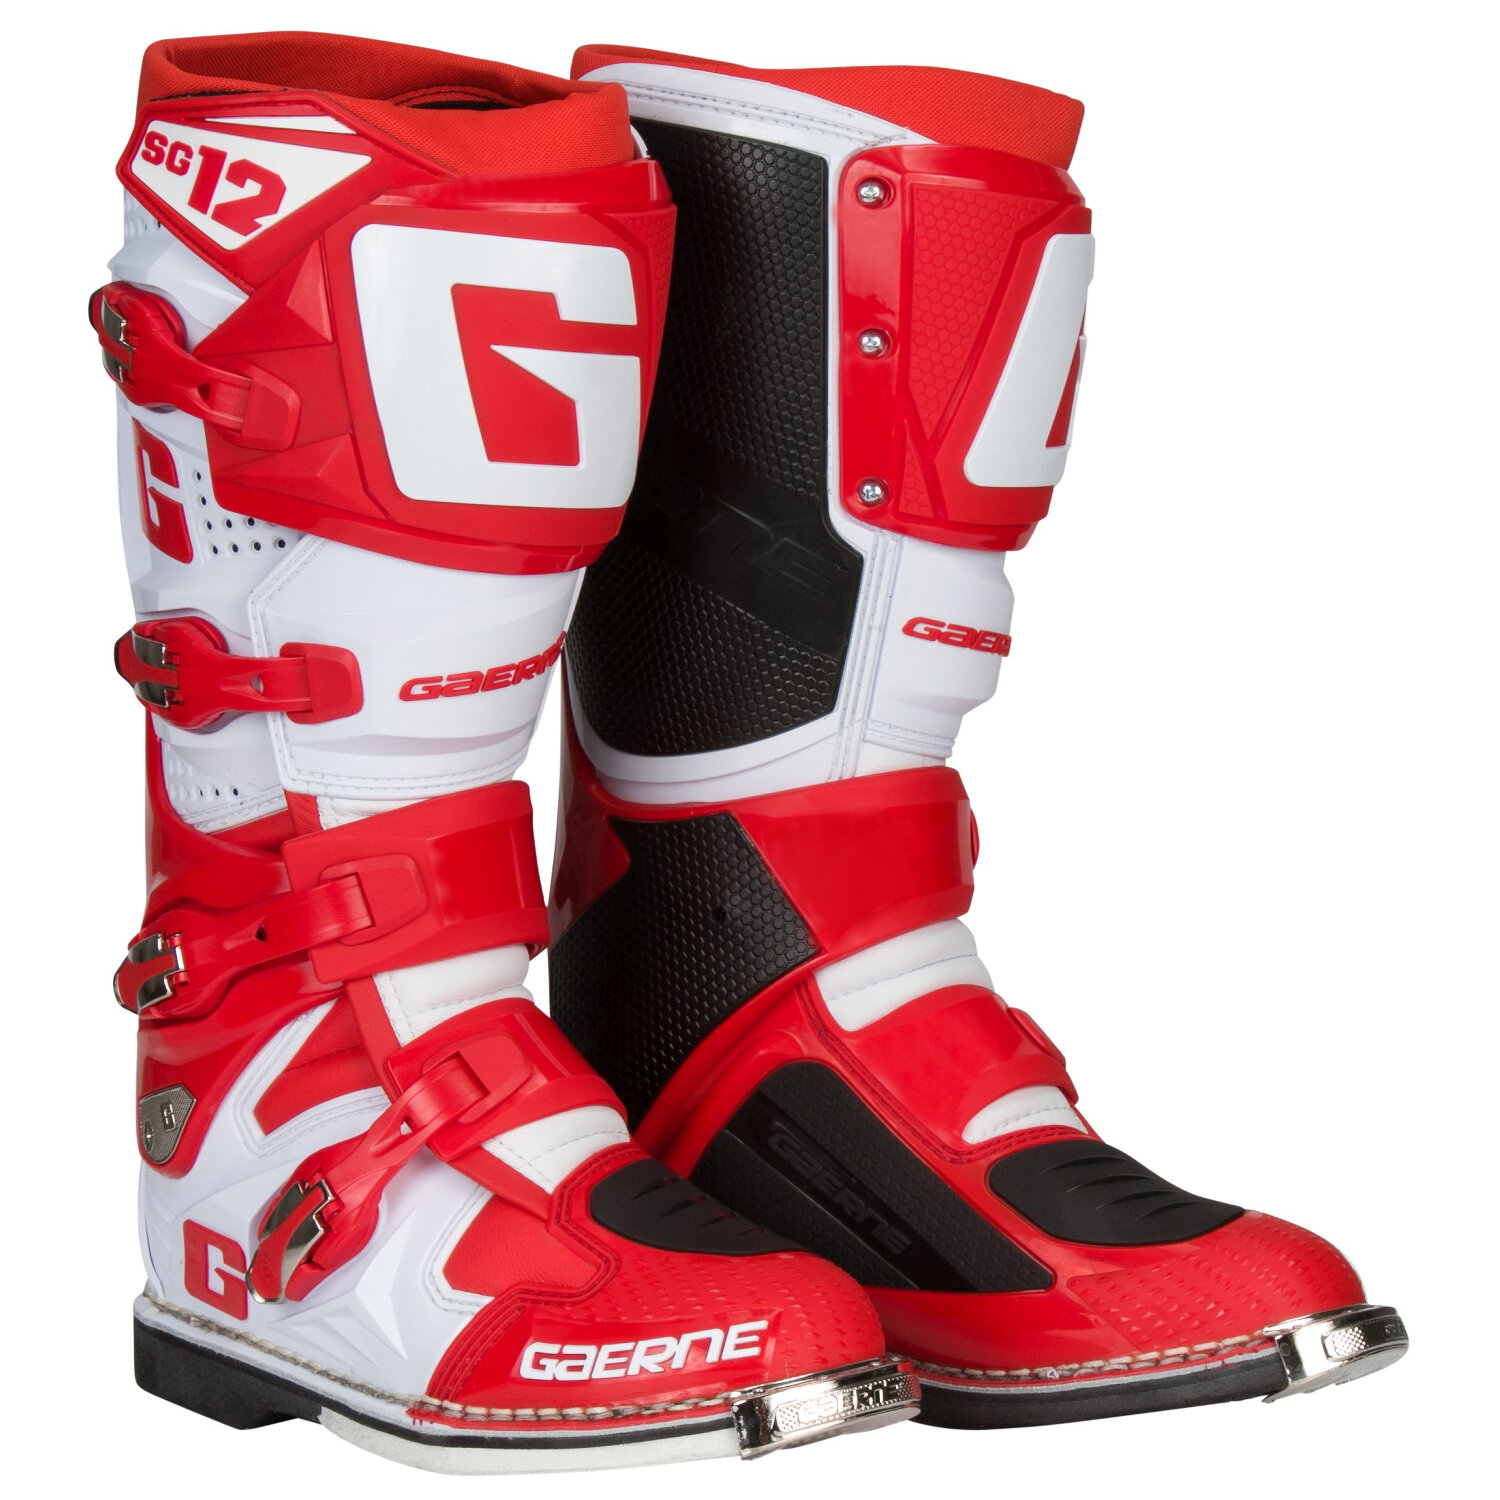 Gaerne MX Boots SG 12 Red